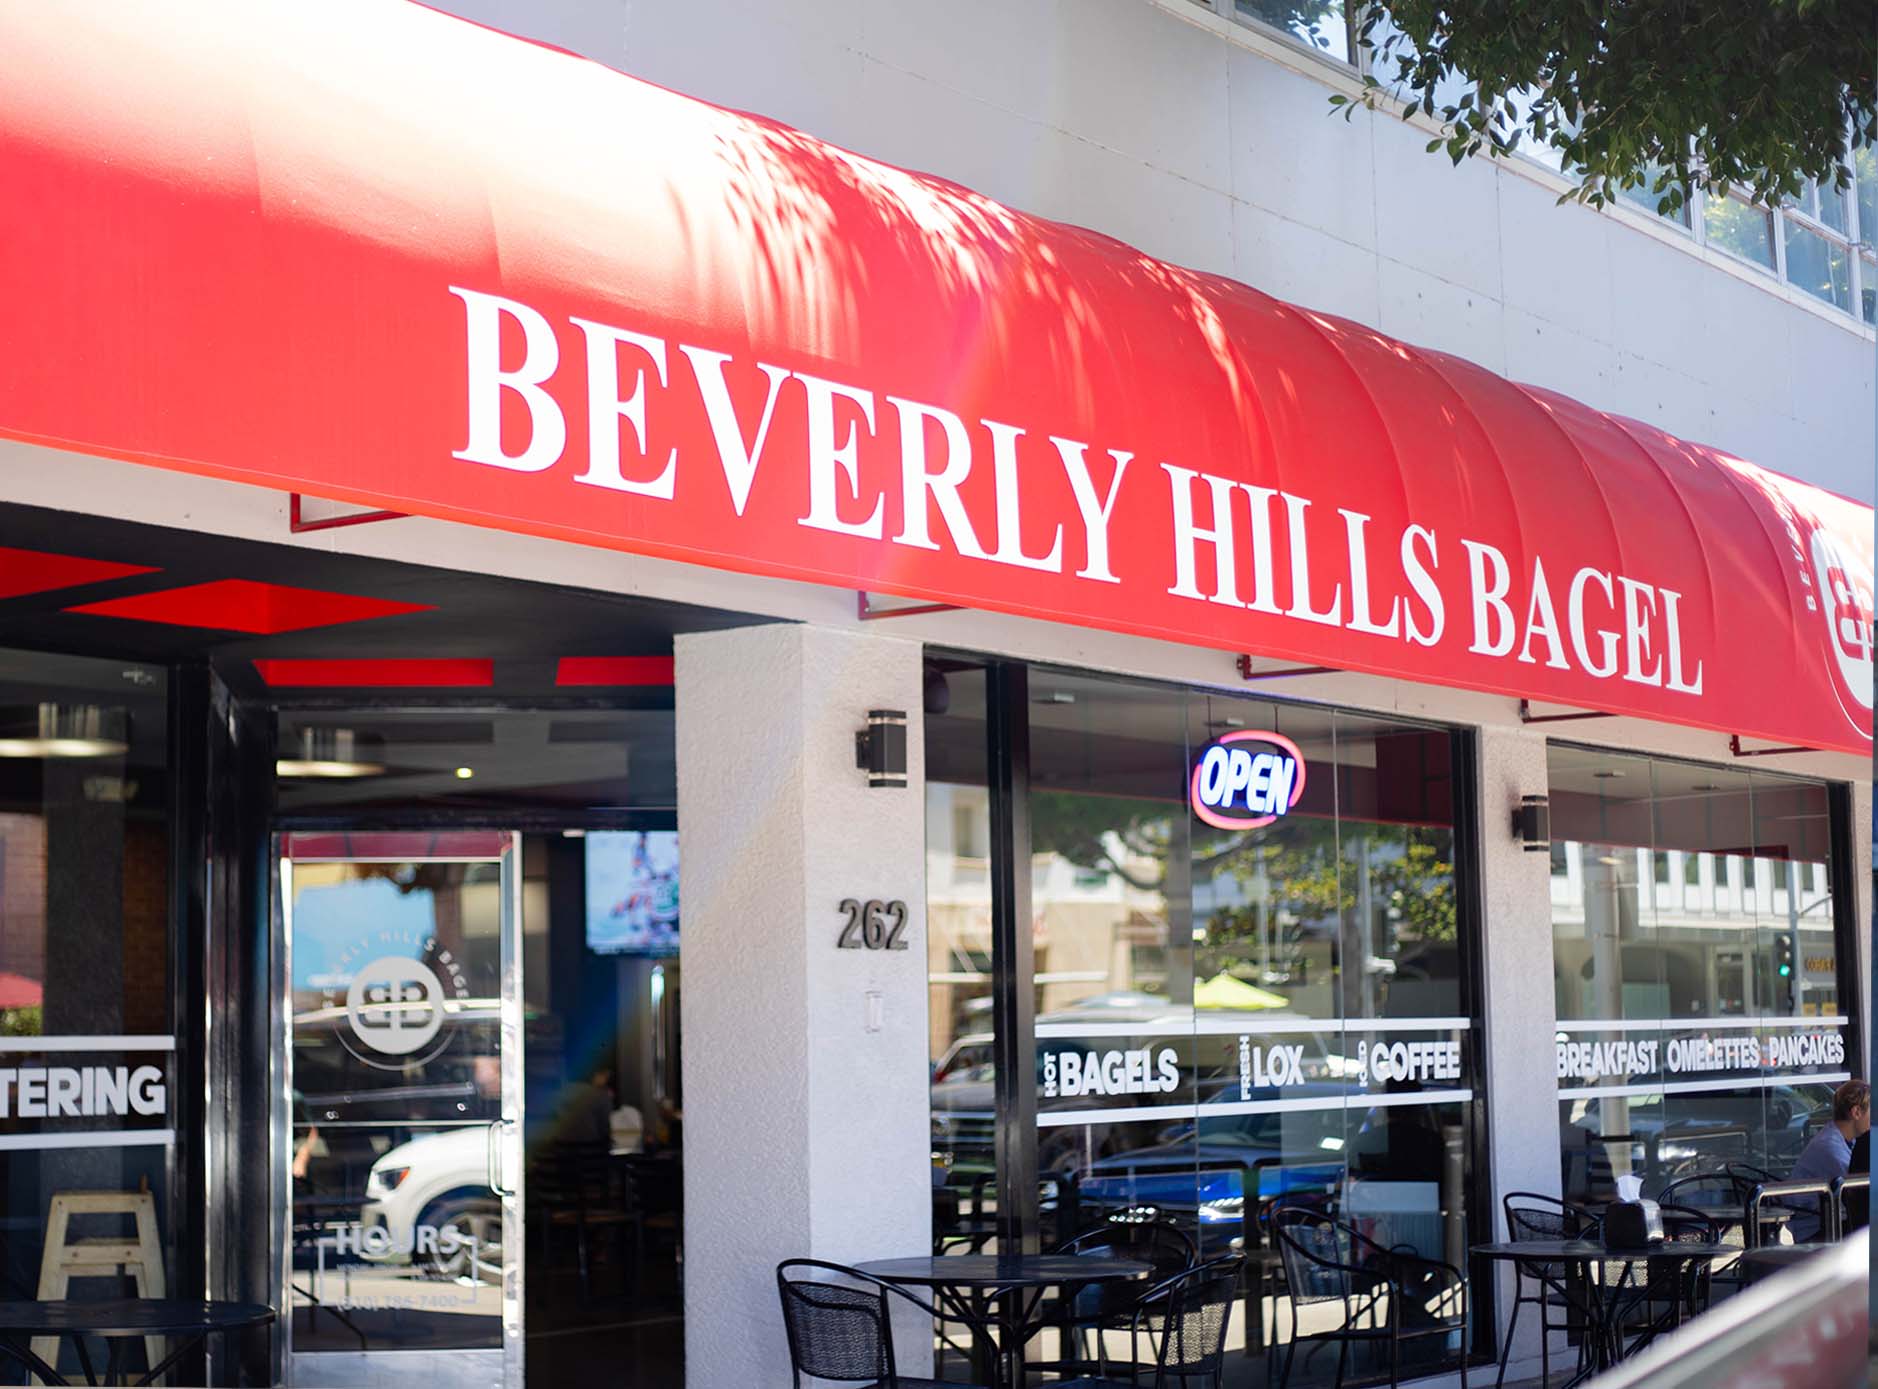 exterior photo of beverly hills bagel